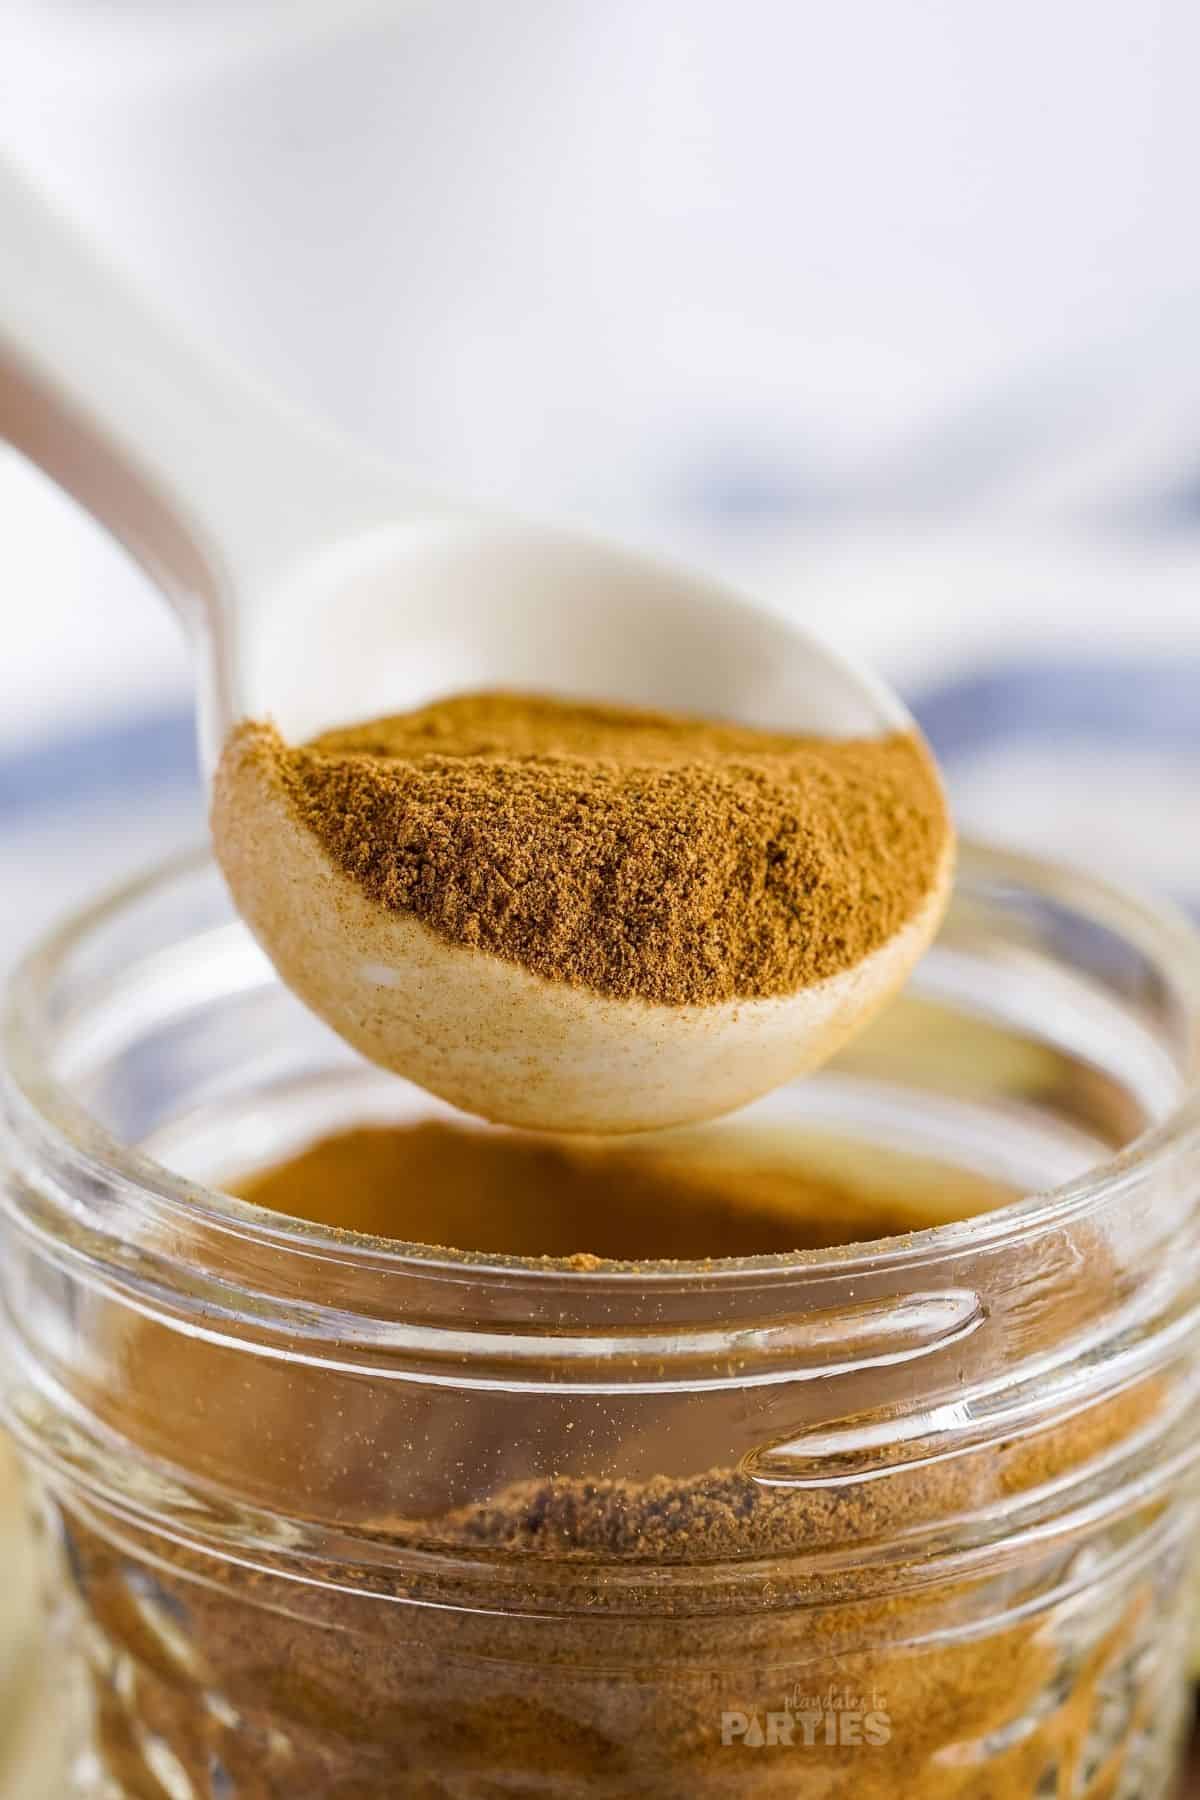 A teaspoon is used to measure out homemade apple pie spice mix.